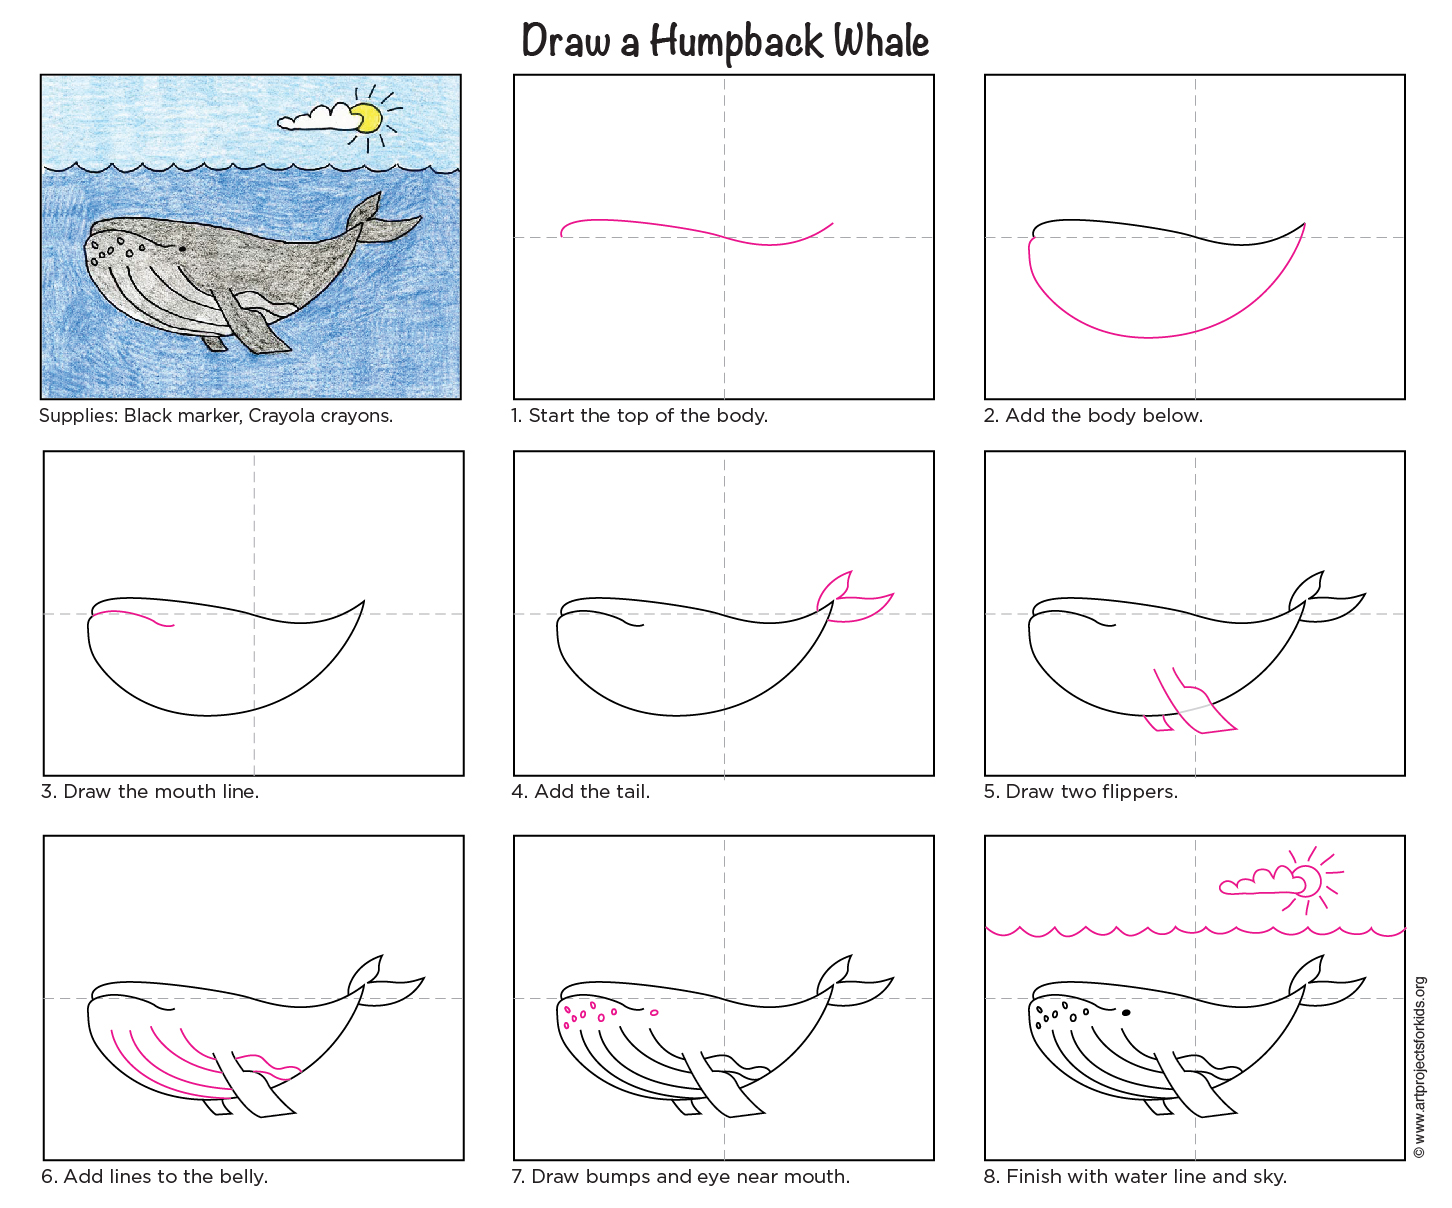 Draw a Humpback Whale - Art Projects for Kids